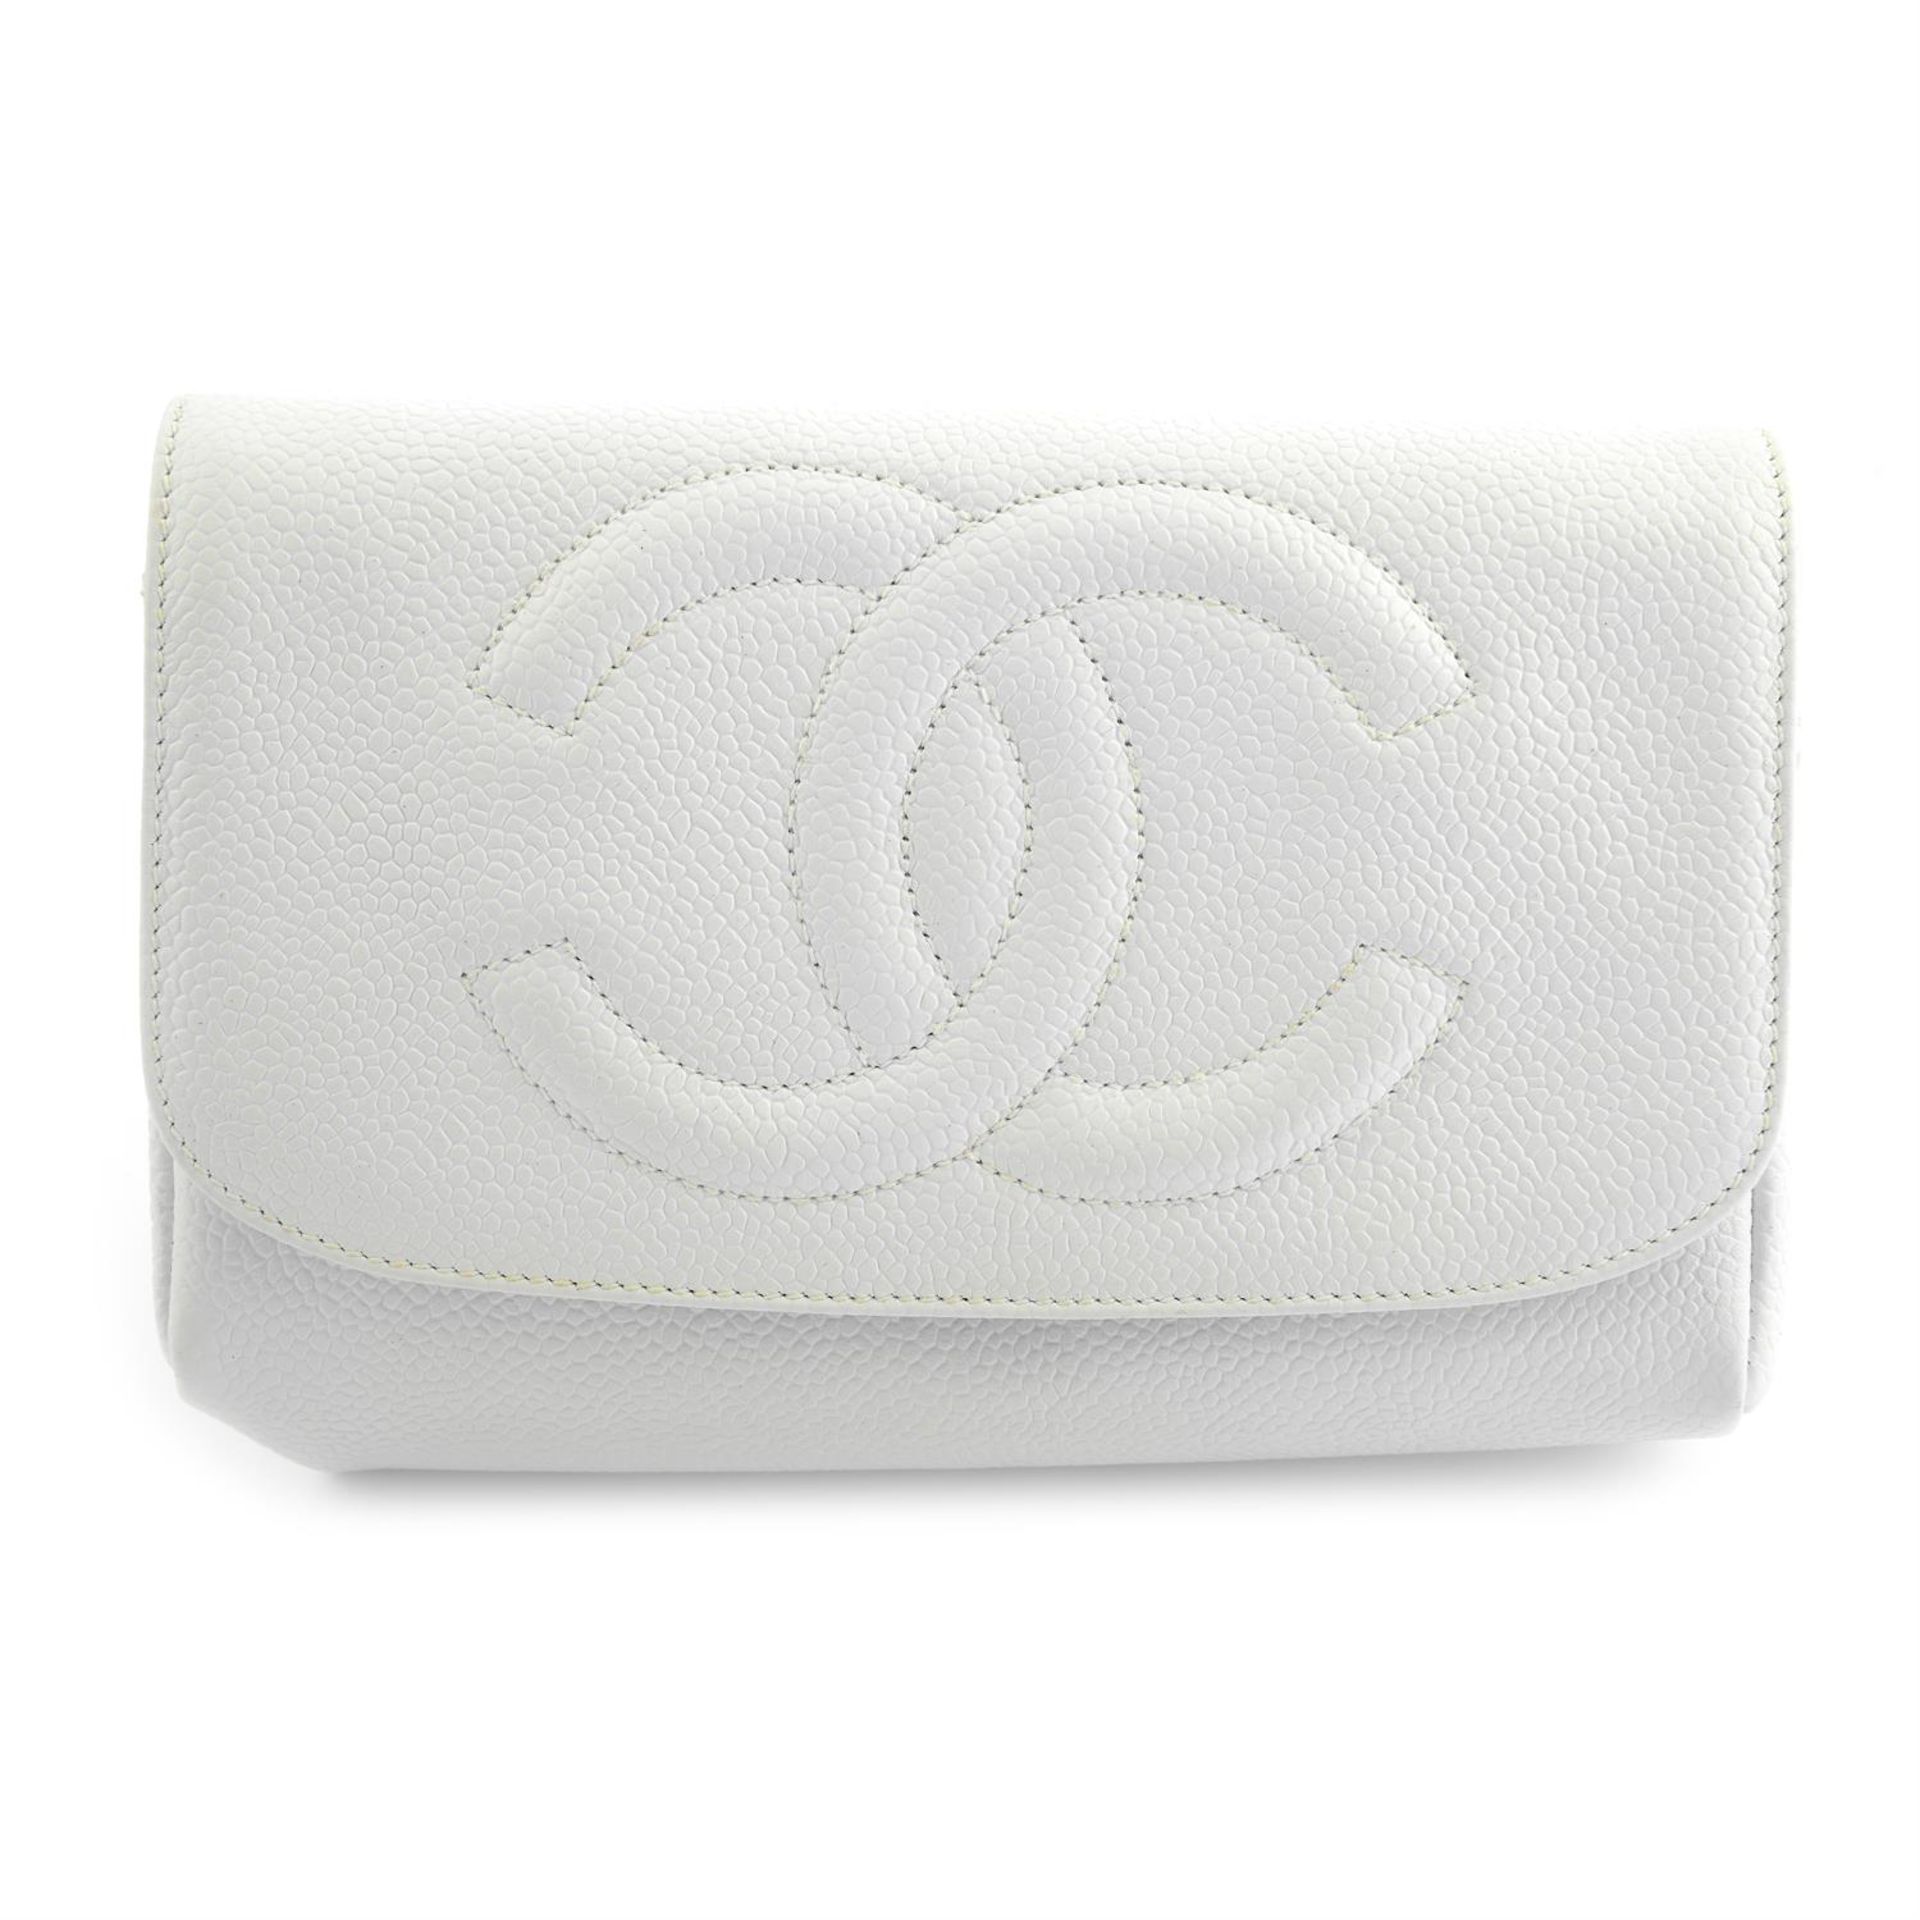 CHANEL - a 1996 white caviar leather cosmetic pouch.